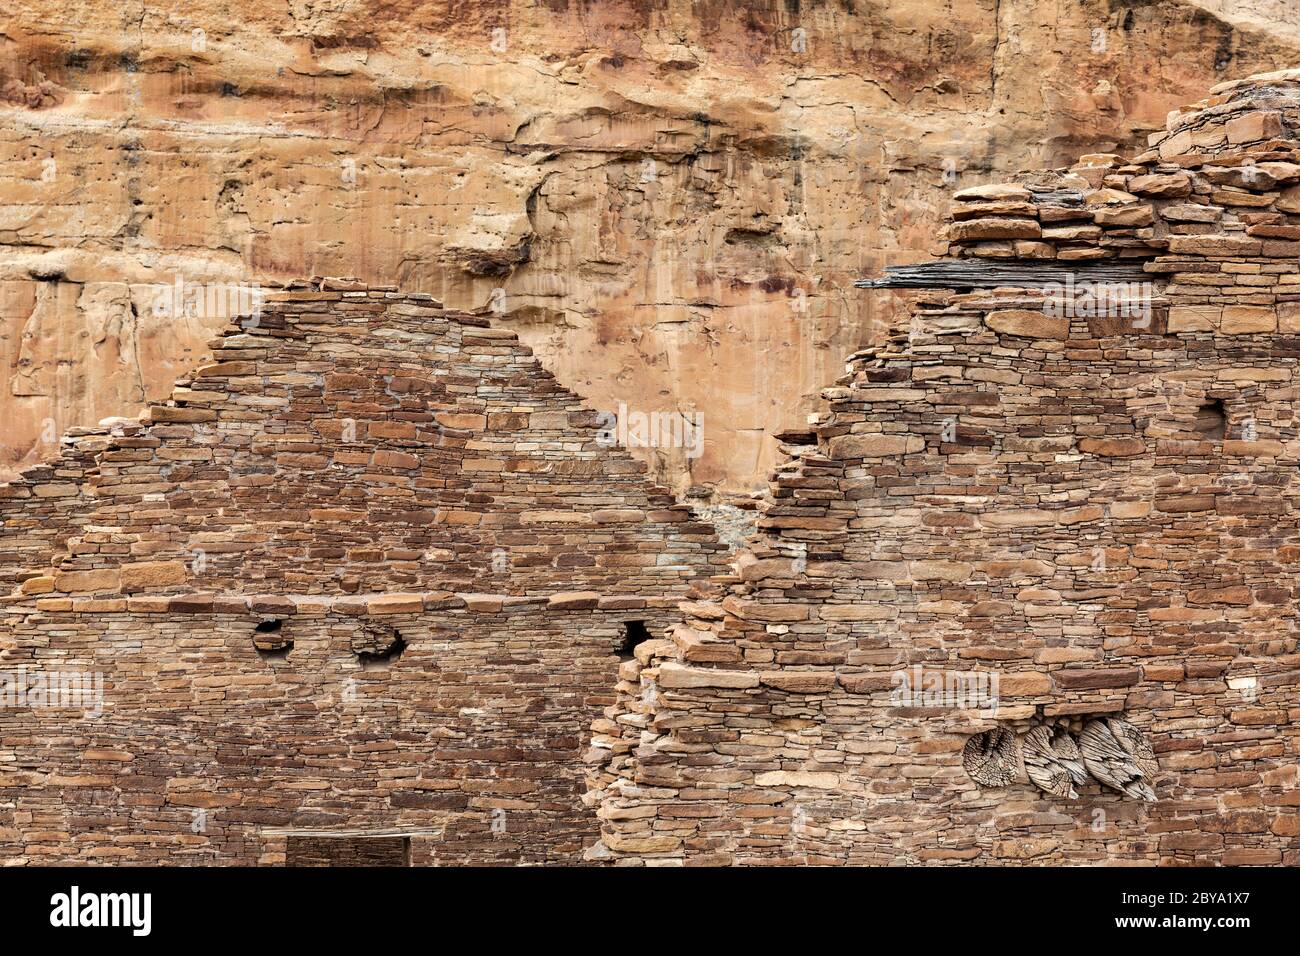 NM00614-00...NEW MEXICO - Steinmauern in Chetro Ketl in Chaco Culture National Historic Park. Stockfoto